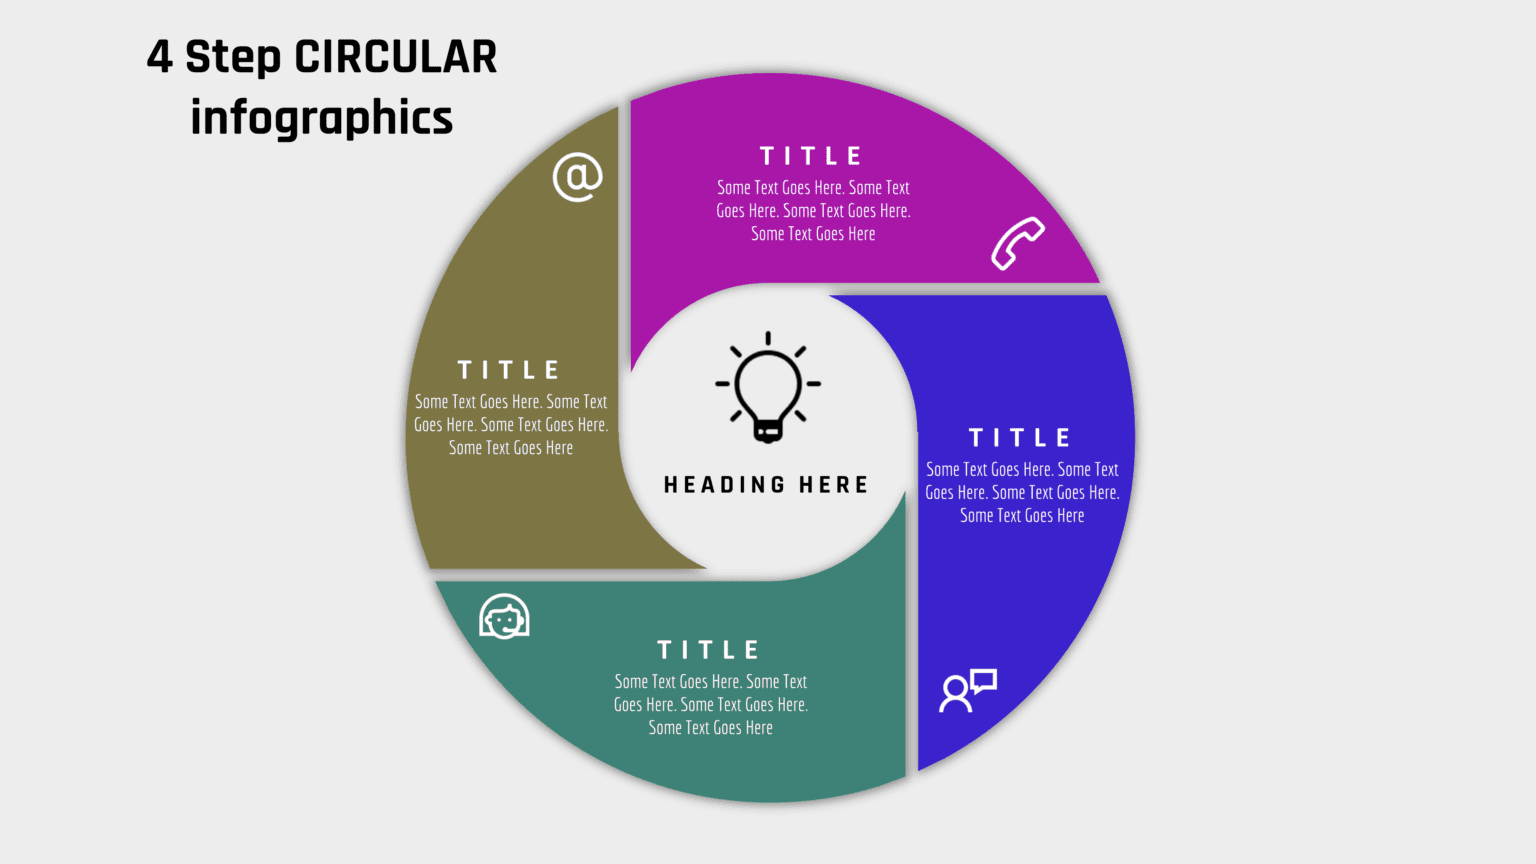 50 Powerpoint 5 Step Circular Infographic Powerup Wit 0650